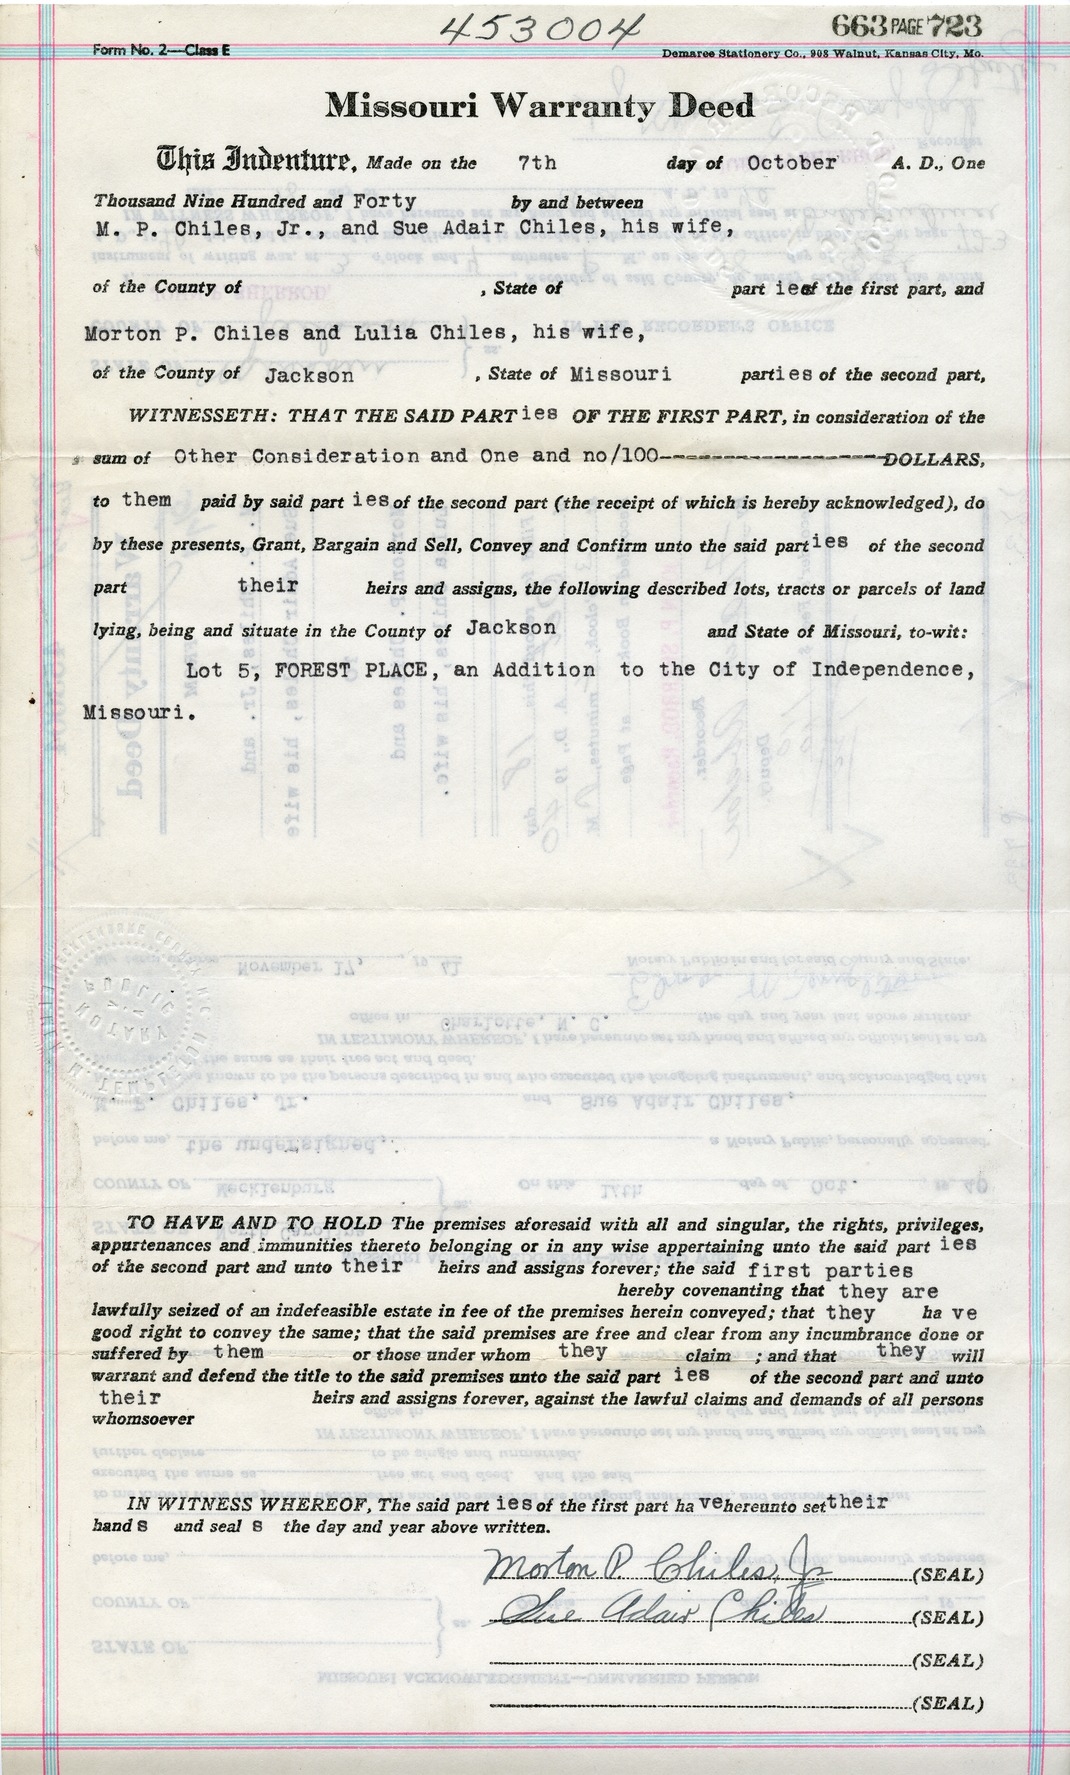 Warranty Deed from M. P. Chiles, Jr. and Sue Adair Chiles to Morton P. Chiles and Lulia Chiles